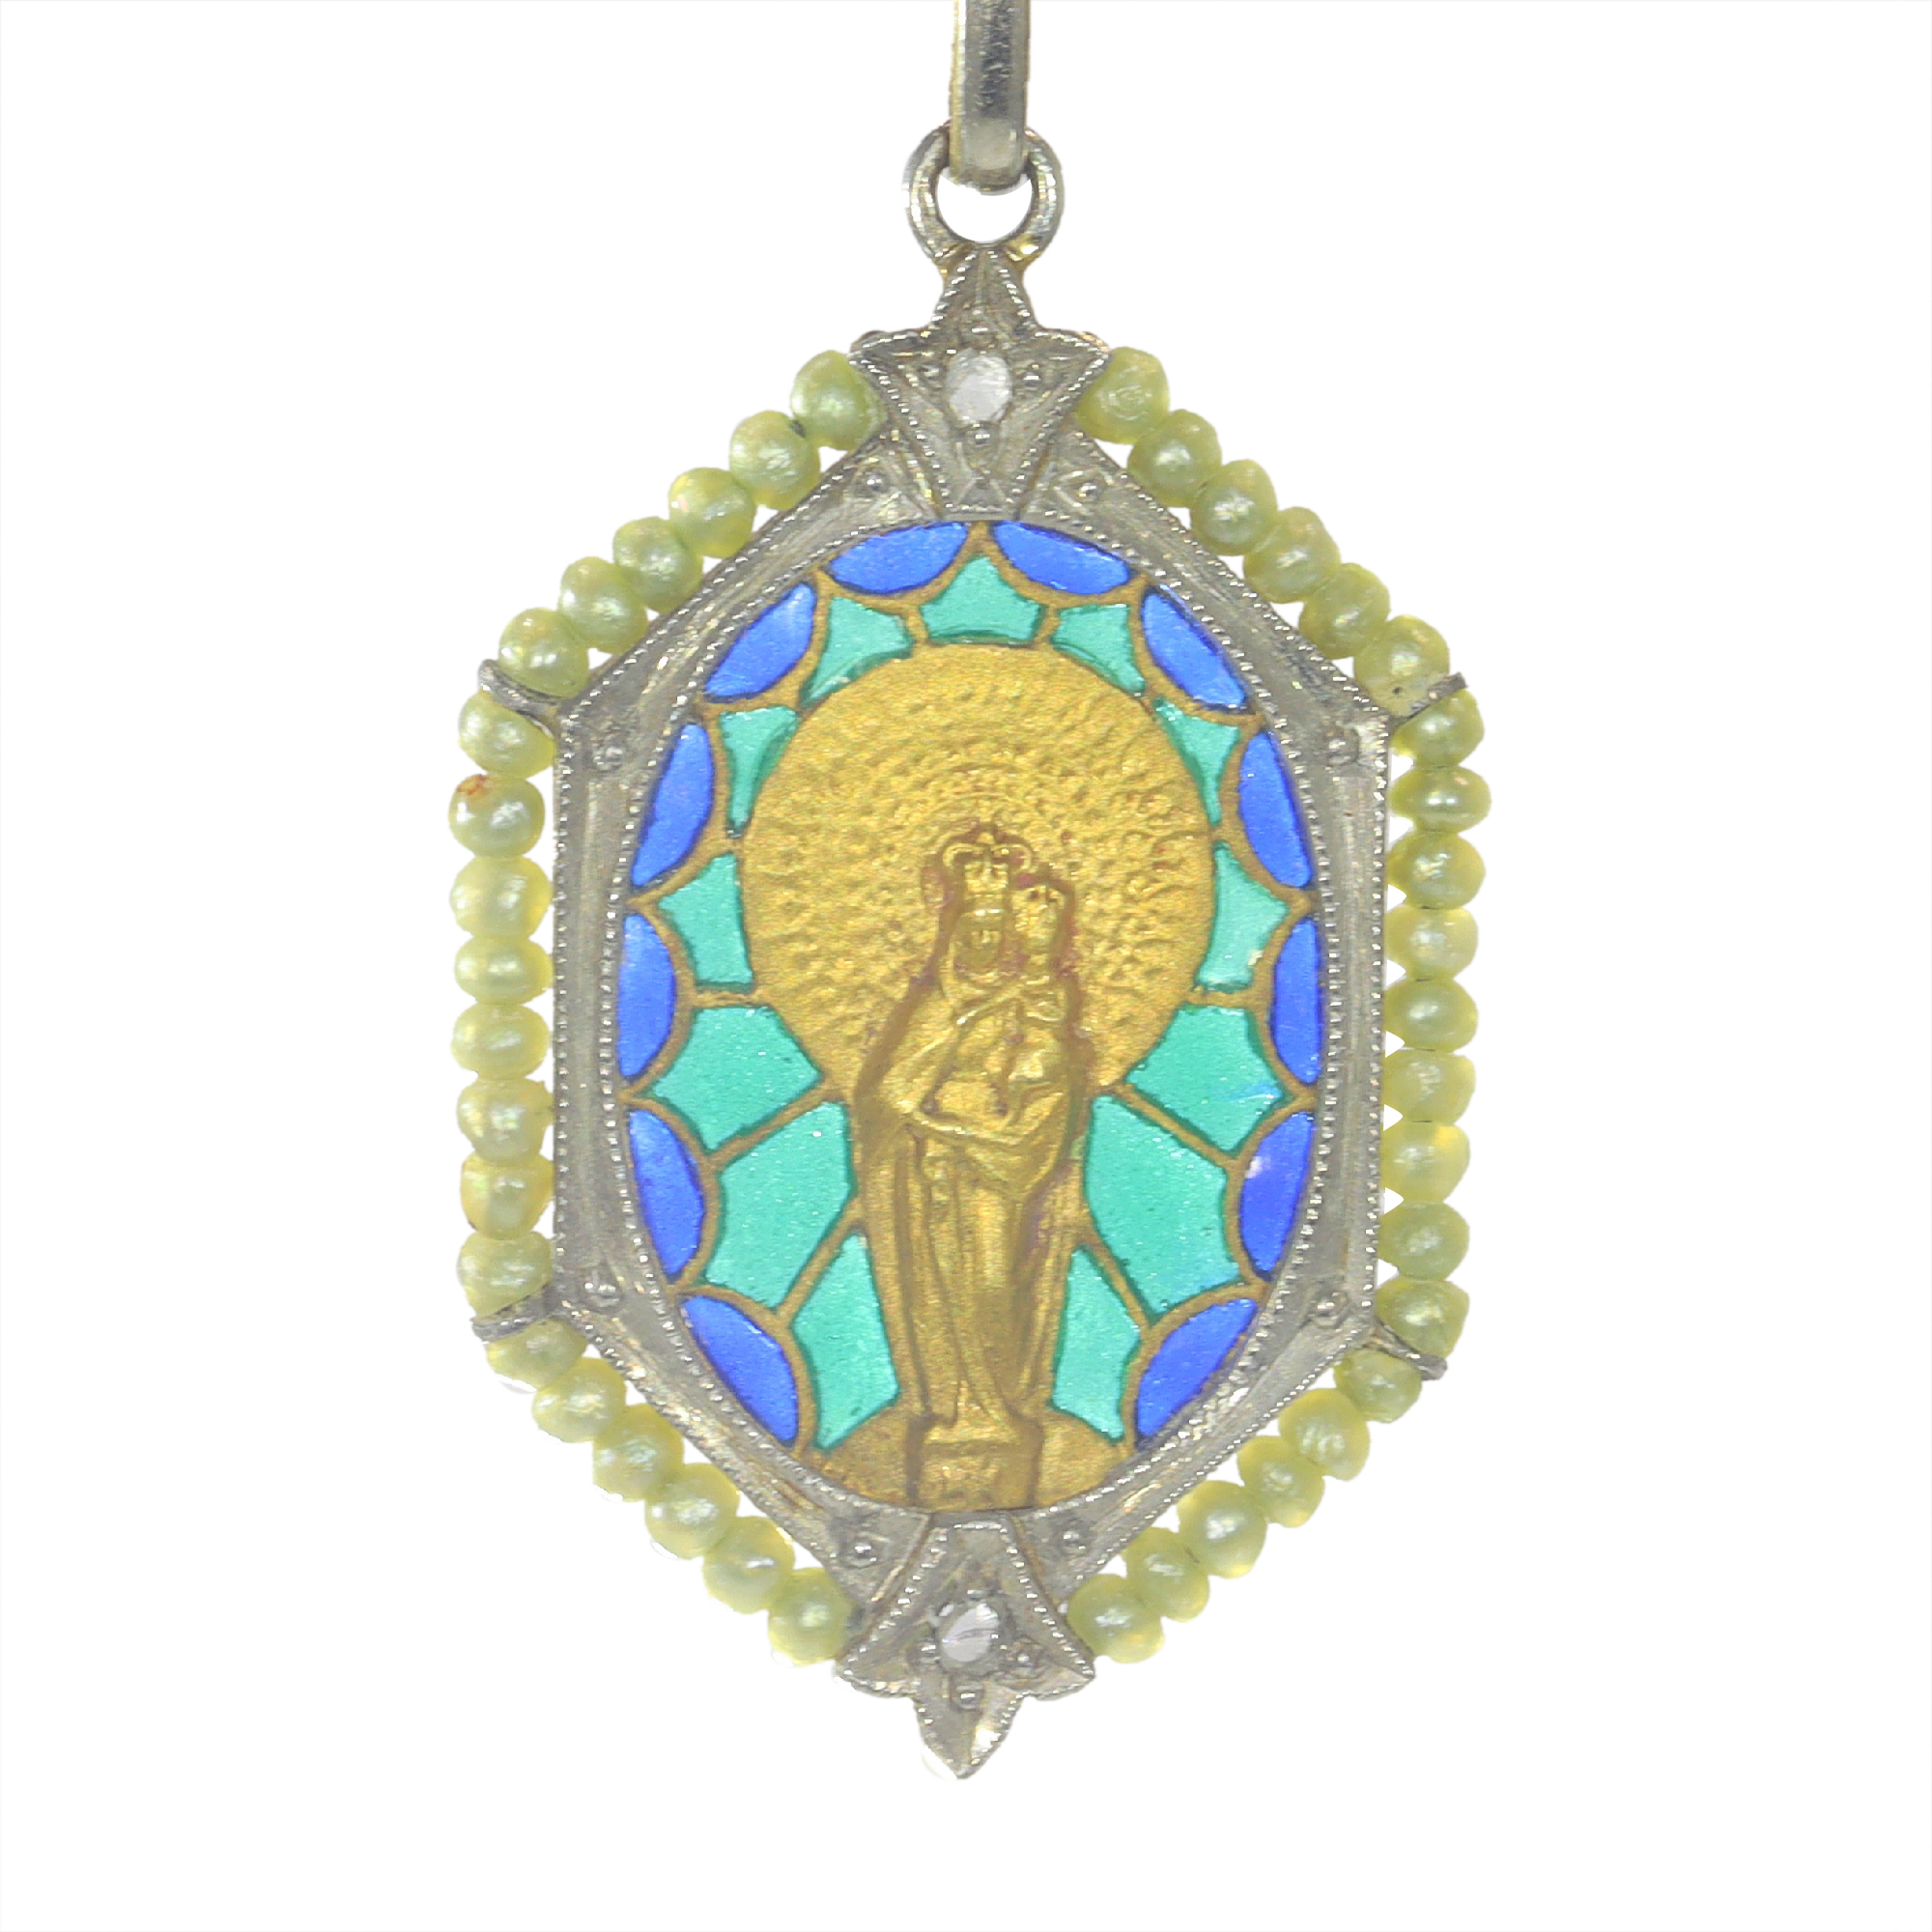 Vintage antique 18K gold Mother Maria and baby Jesus medal with diamonds and plique-a-jour enamel